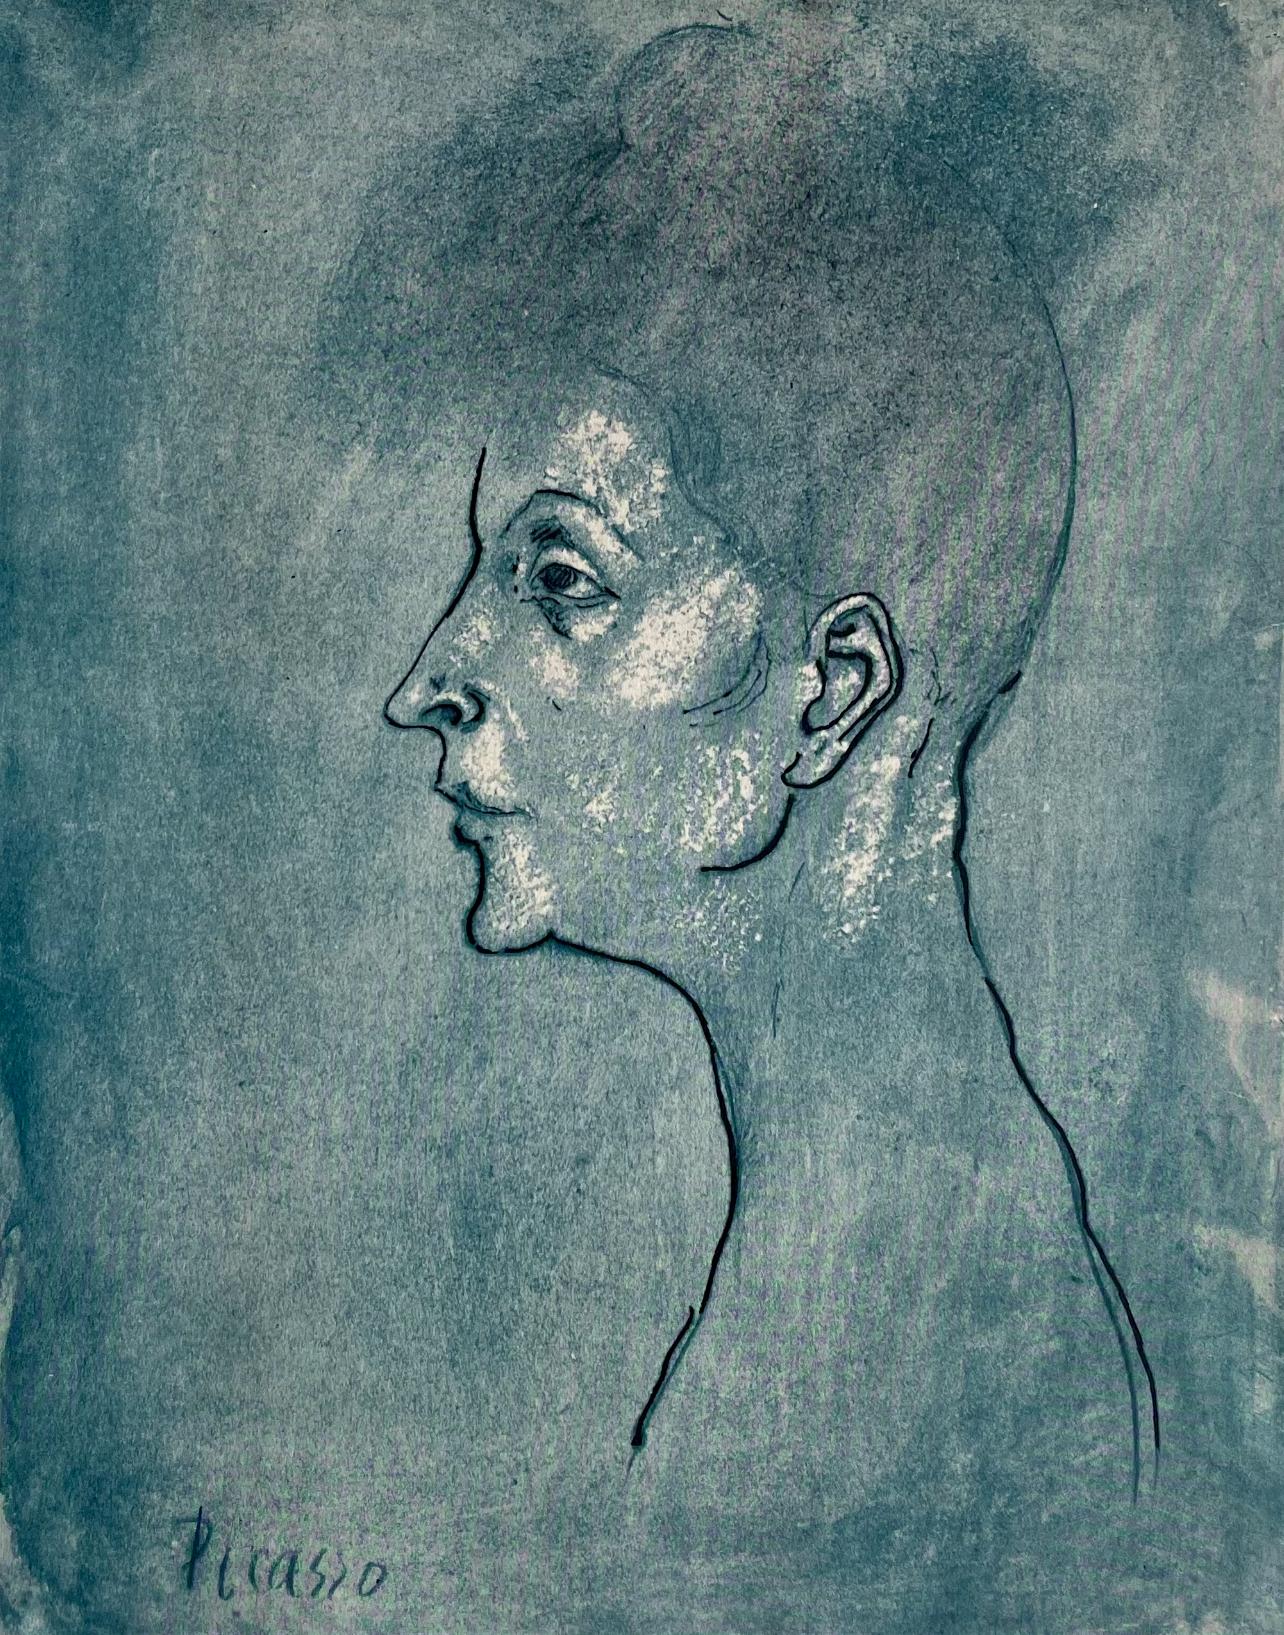 Pablo Picasso Abstract Print - Picasso, Head of a Woman, Picasso: Fifteen Drawings (after)